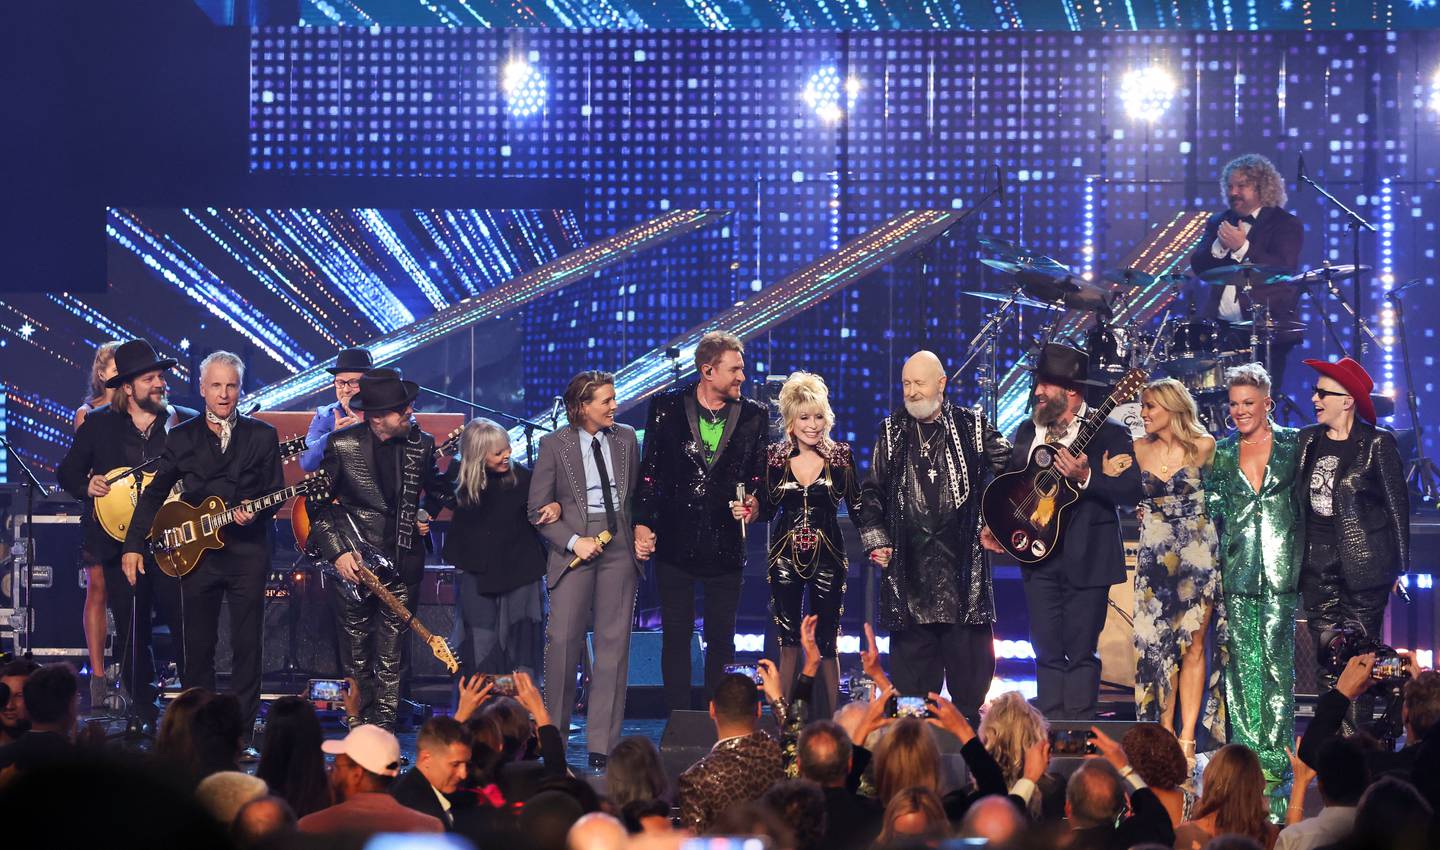 Dolly Parton on stage accompanied by Eurythmics, Neil Giraldo, Pat Benatar, Brandi Carlile, Simon Le Bon, Rob Halford, Zac Brown, Sheryl Crow, Pink and Annie Lennox at the 37th Annual Rock & Roll Hall of Fame Induction Ceremony in Los Angeles. Reuters